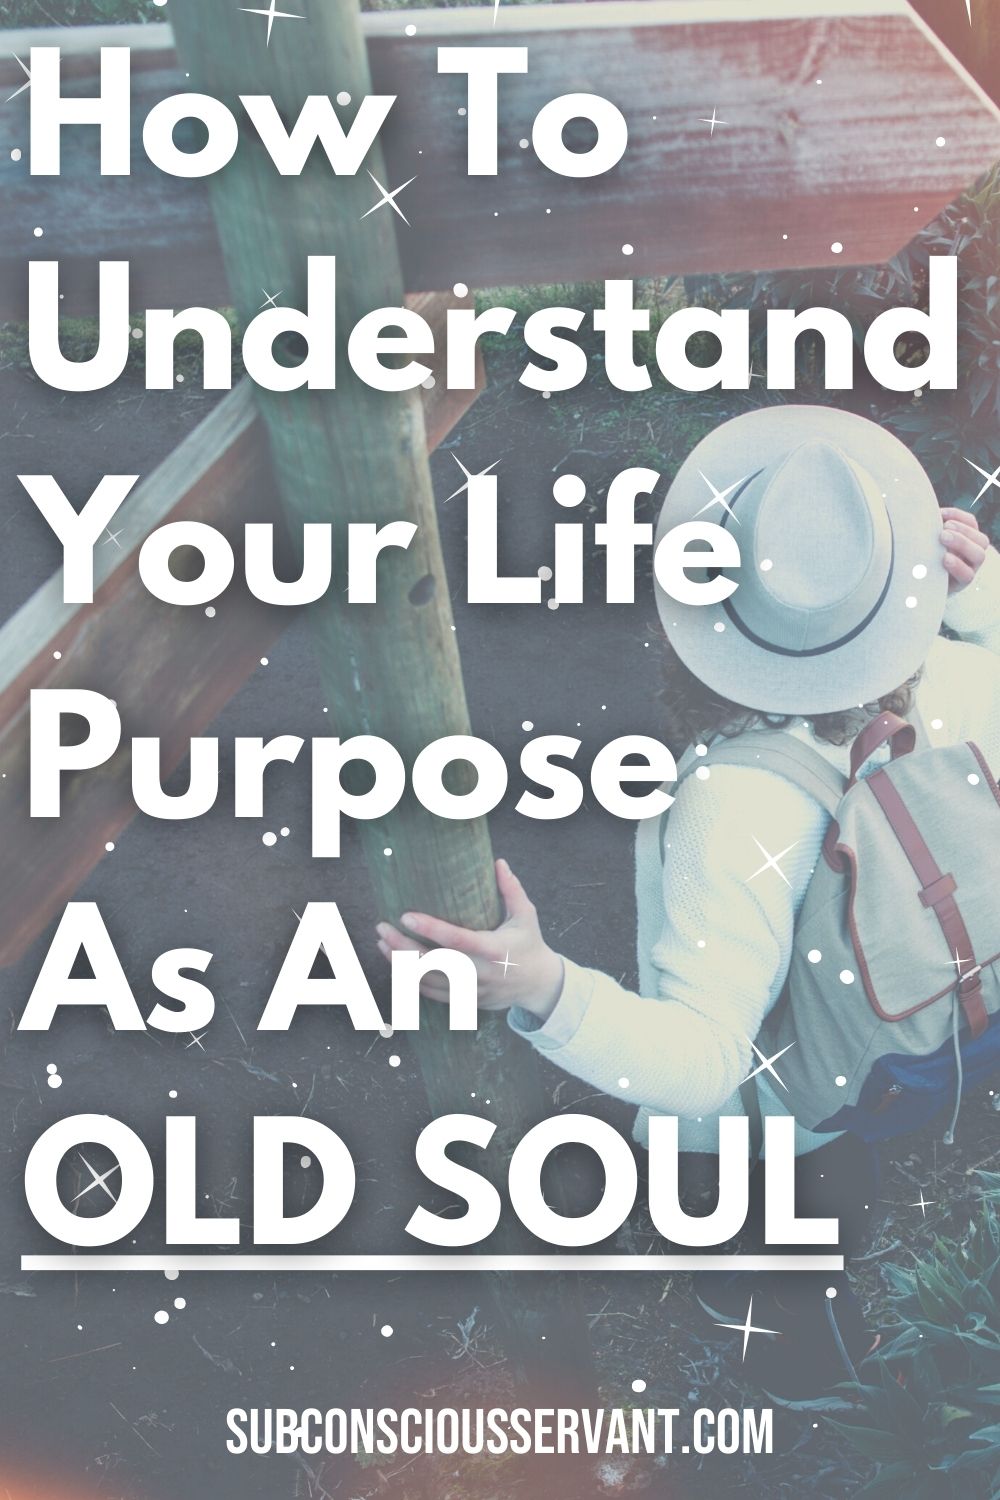 How To Understand Your Life Purpose As An  OLD SOUL